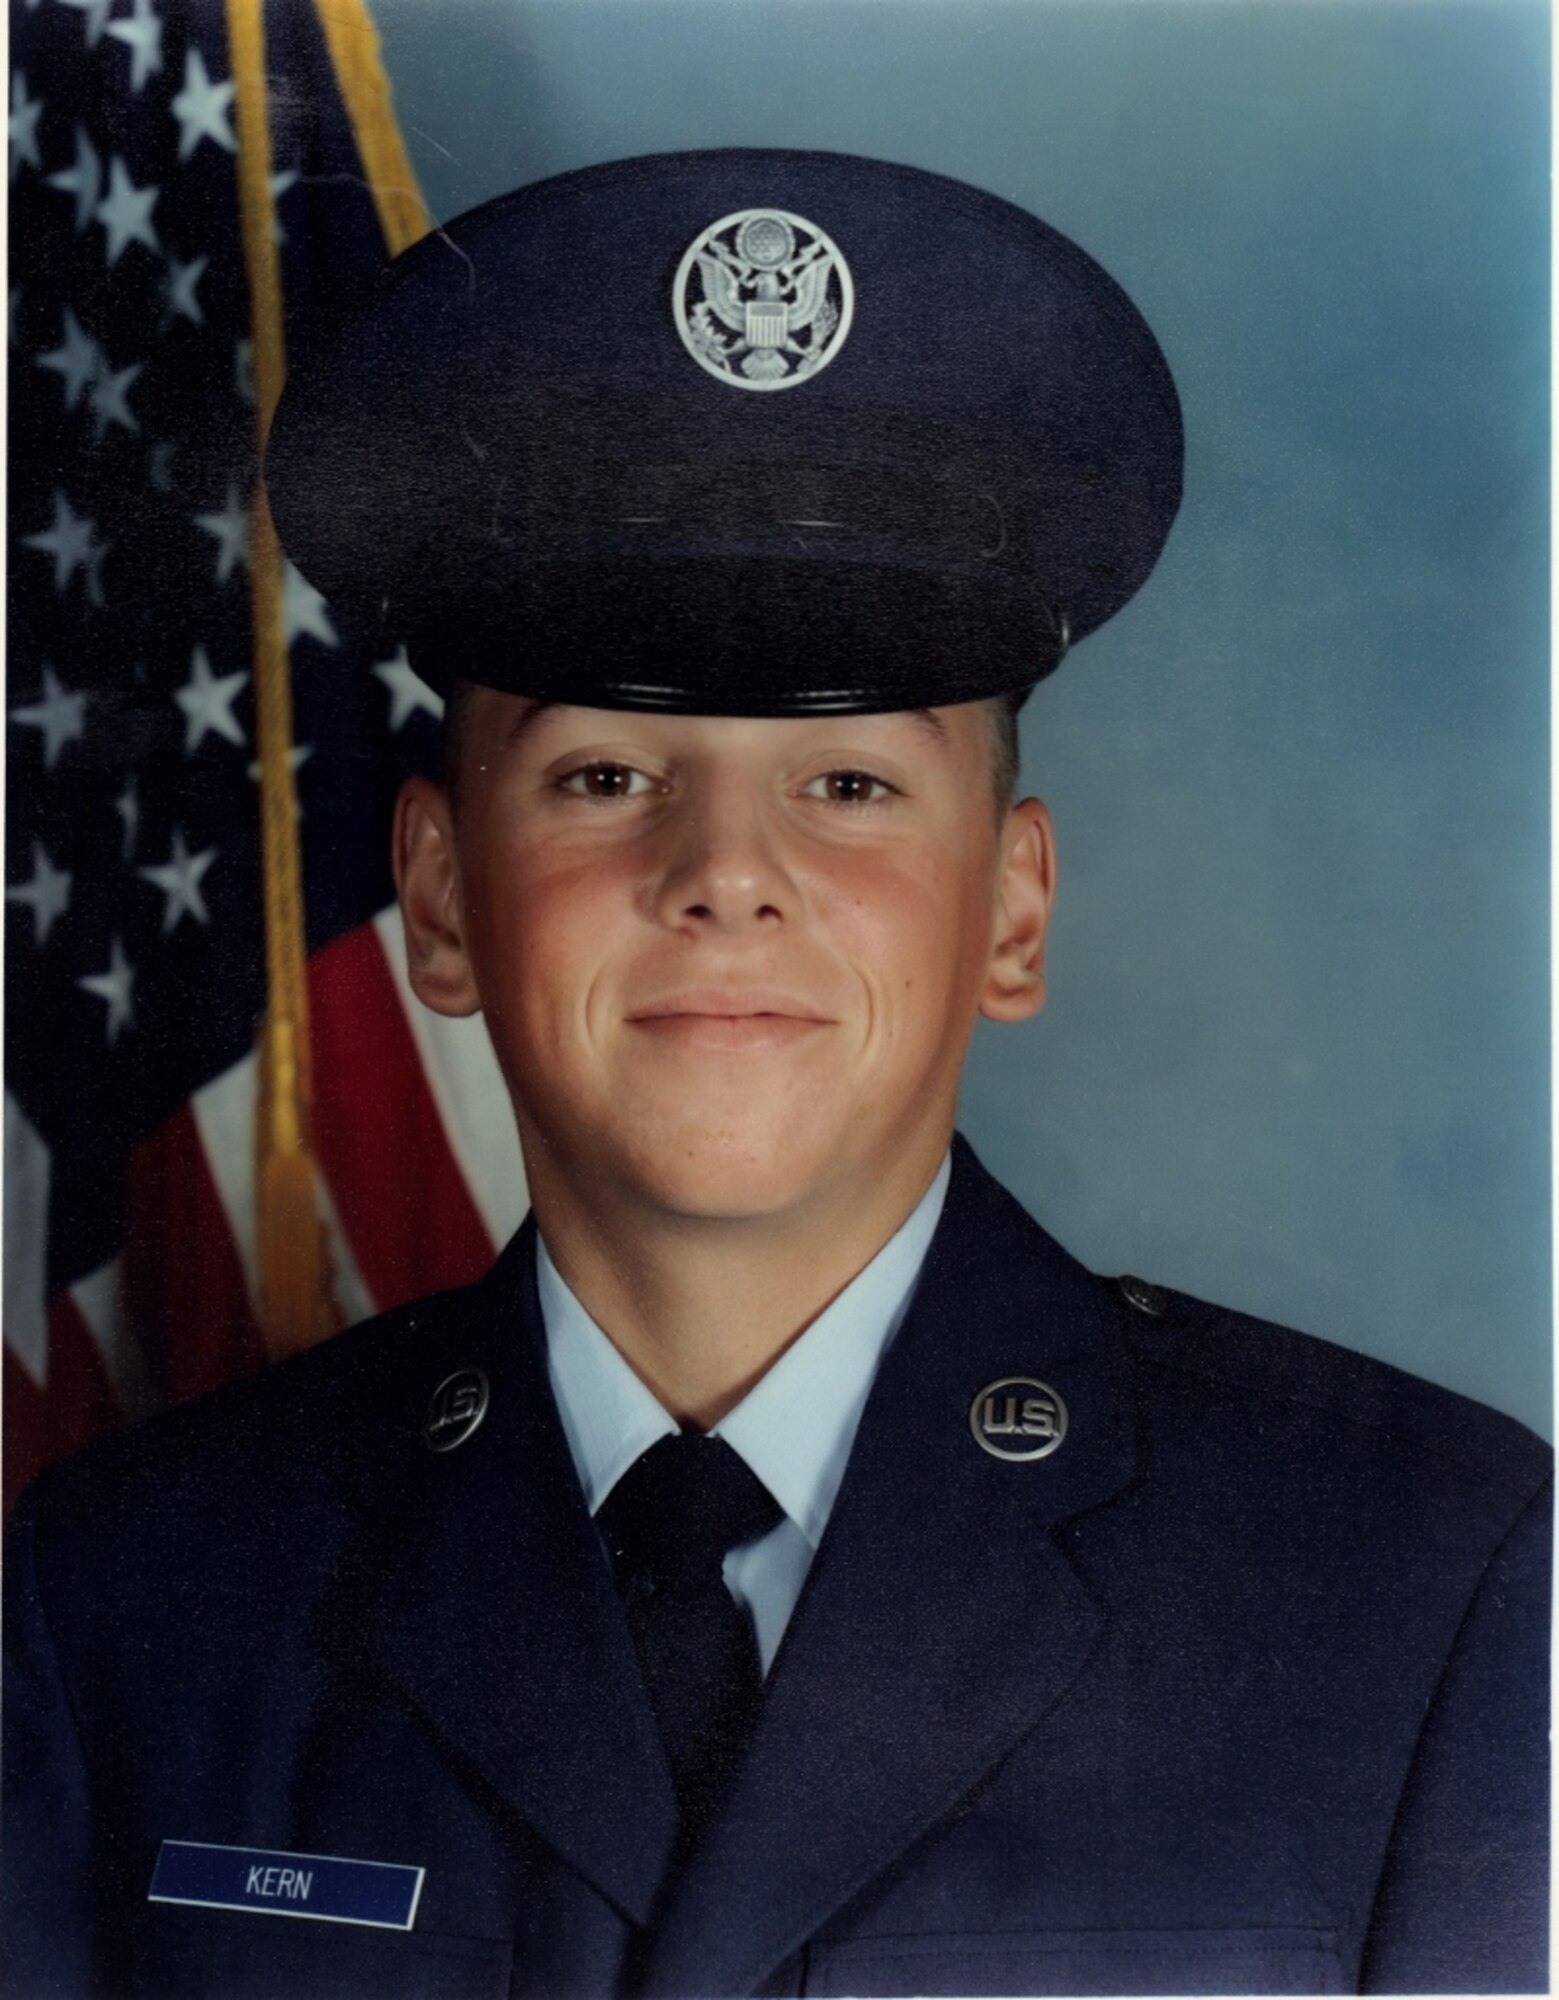 Todd Kern as a trainee during Basic Military Training. (Courtesy photo)